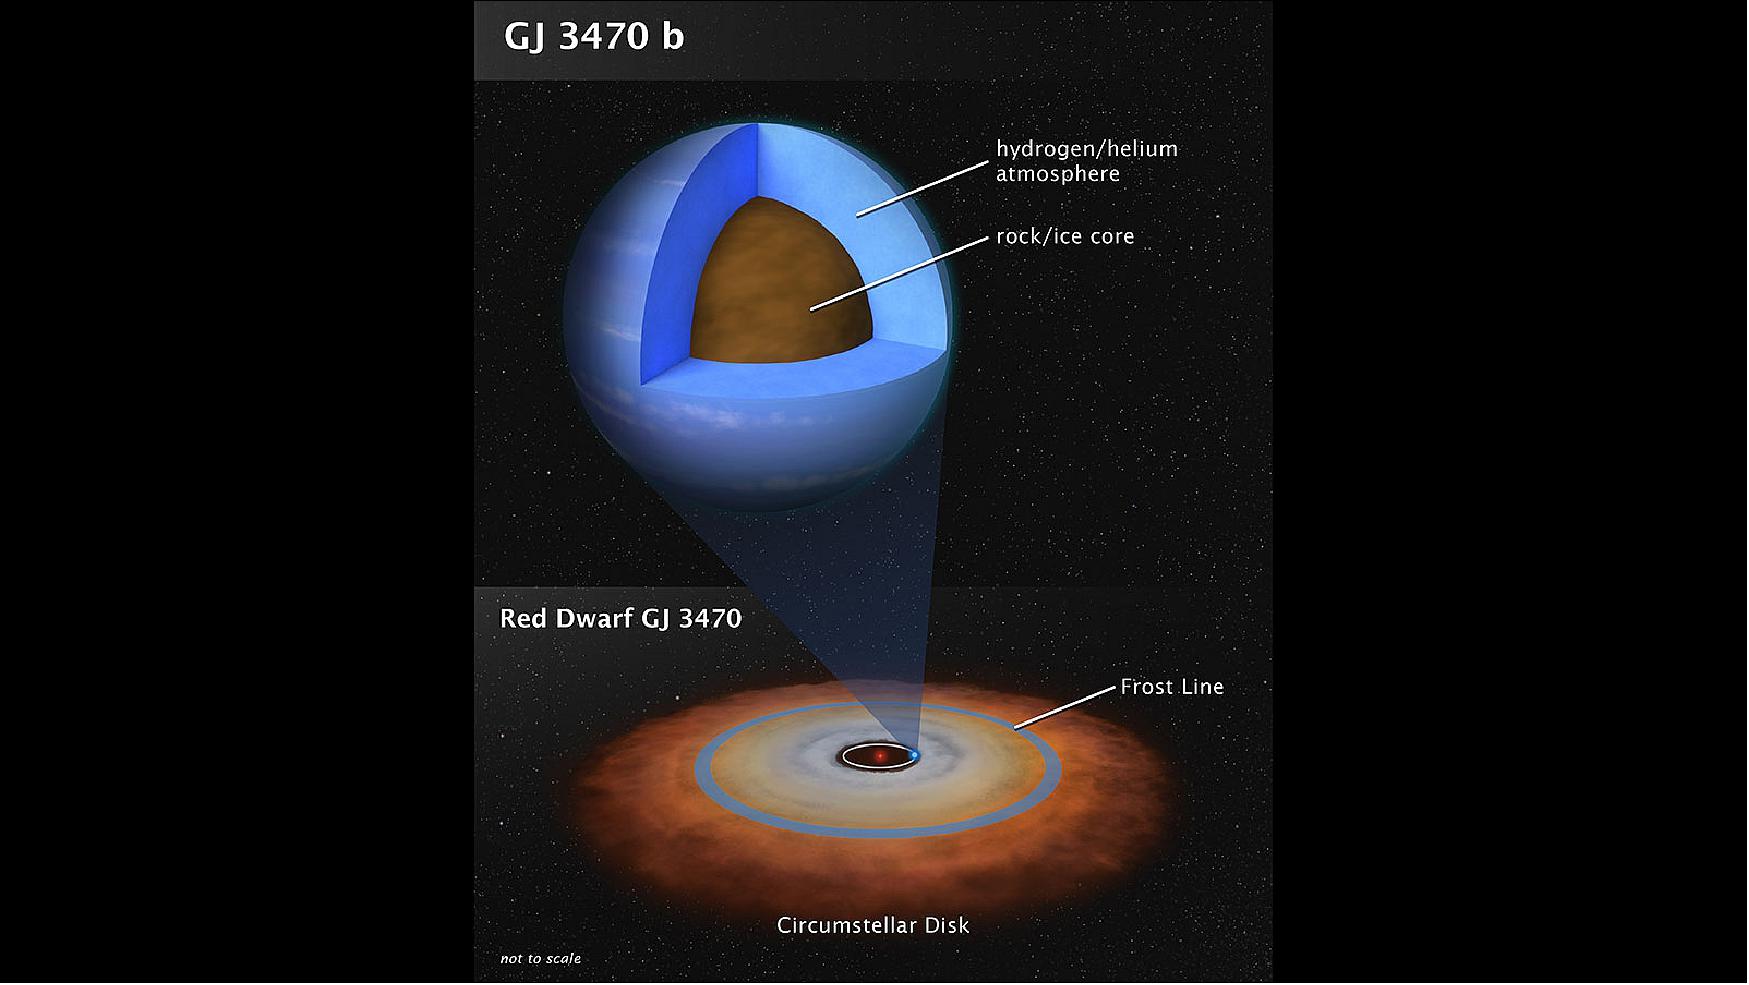 Figure 40: This artist's illustration shows the theoretical internal structure of the exoplanet GJ 3470 b. It is unlike any planet found in the Solar System. Weighing in at 12.6 Earth masses the planet is more massive than Earth but less massive than Neptune. Unlike Neptune, which is 3 billion miles from the Sun, GJ 3470 b may have formed very close to its red dwarf star as a dry, rocky object. It then gravitationally pulled in hydrogen and helium gas from a circumstellar disk to build up a thick atmosphere. The disk dissipated many billions of years ago, and the planet stopped growing. The bottom illustration shows the disk as the system may have looked long ago. Observation by NASA's Hubble and Spitzer space telescopes have chemically analyzed the composition of GJ 3470 b's very clear and deep atmosphere, yielding clues to the planet's origin. Many planets of this mass exist in our galaxy [image credit: NASA, ESA, and L. Hustak (STScI)]